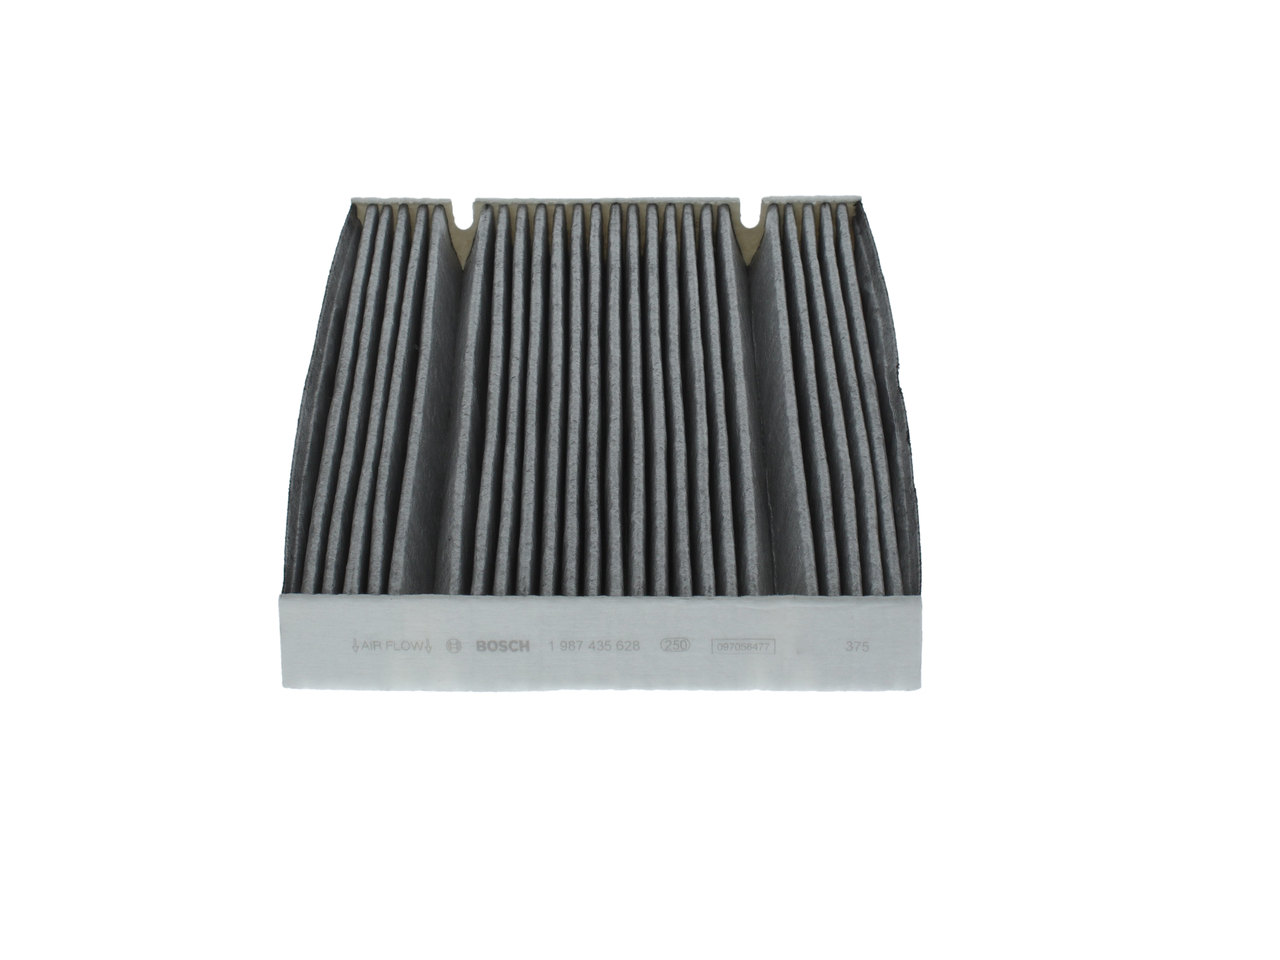 R 5628 BOSCH Activated Carbon Filter, 206 mm x 300 mm x 36 mm Width: 300mm, Height: 36mm, Length: 206mm Cabin filter 1 987 435 628 buy